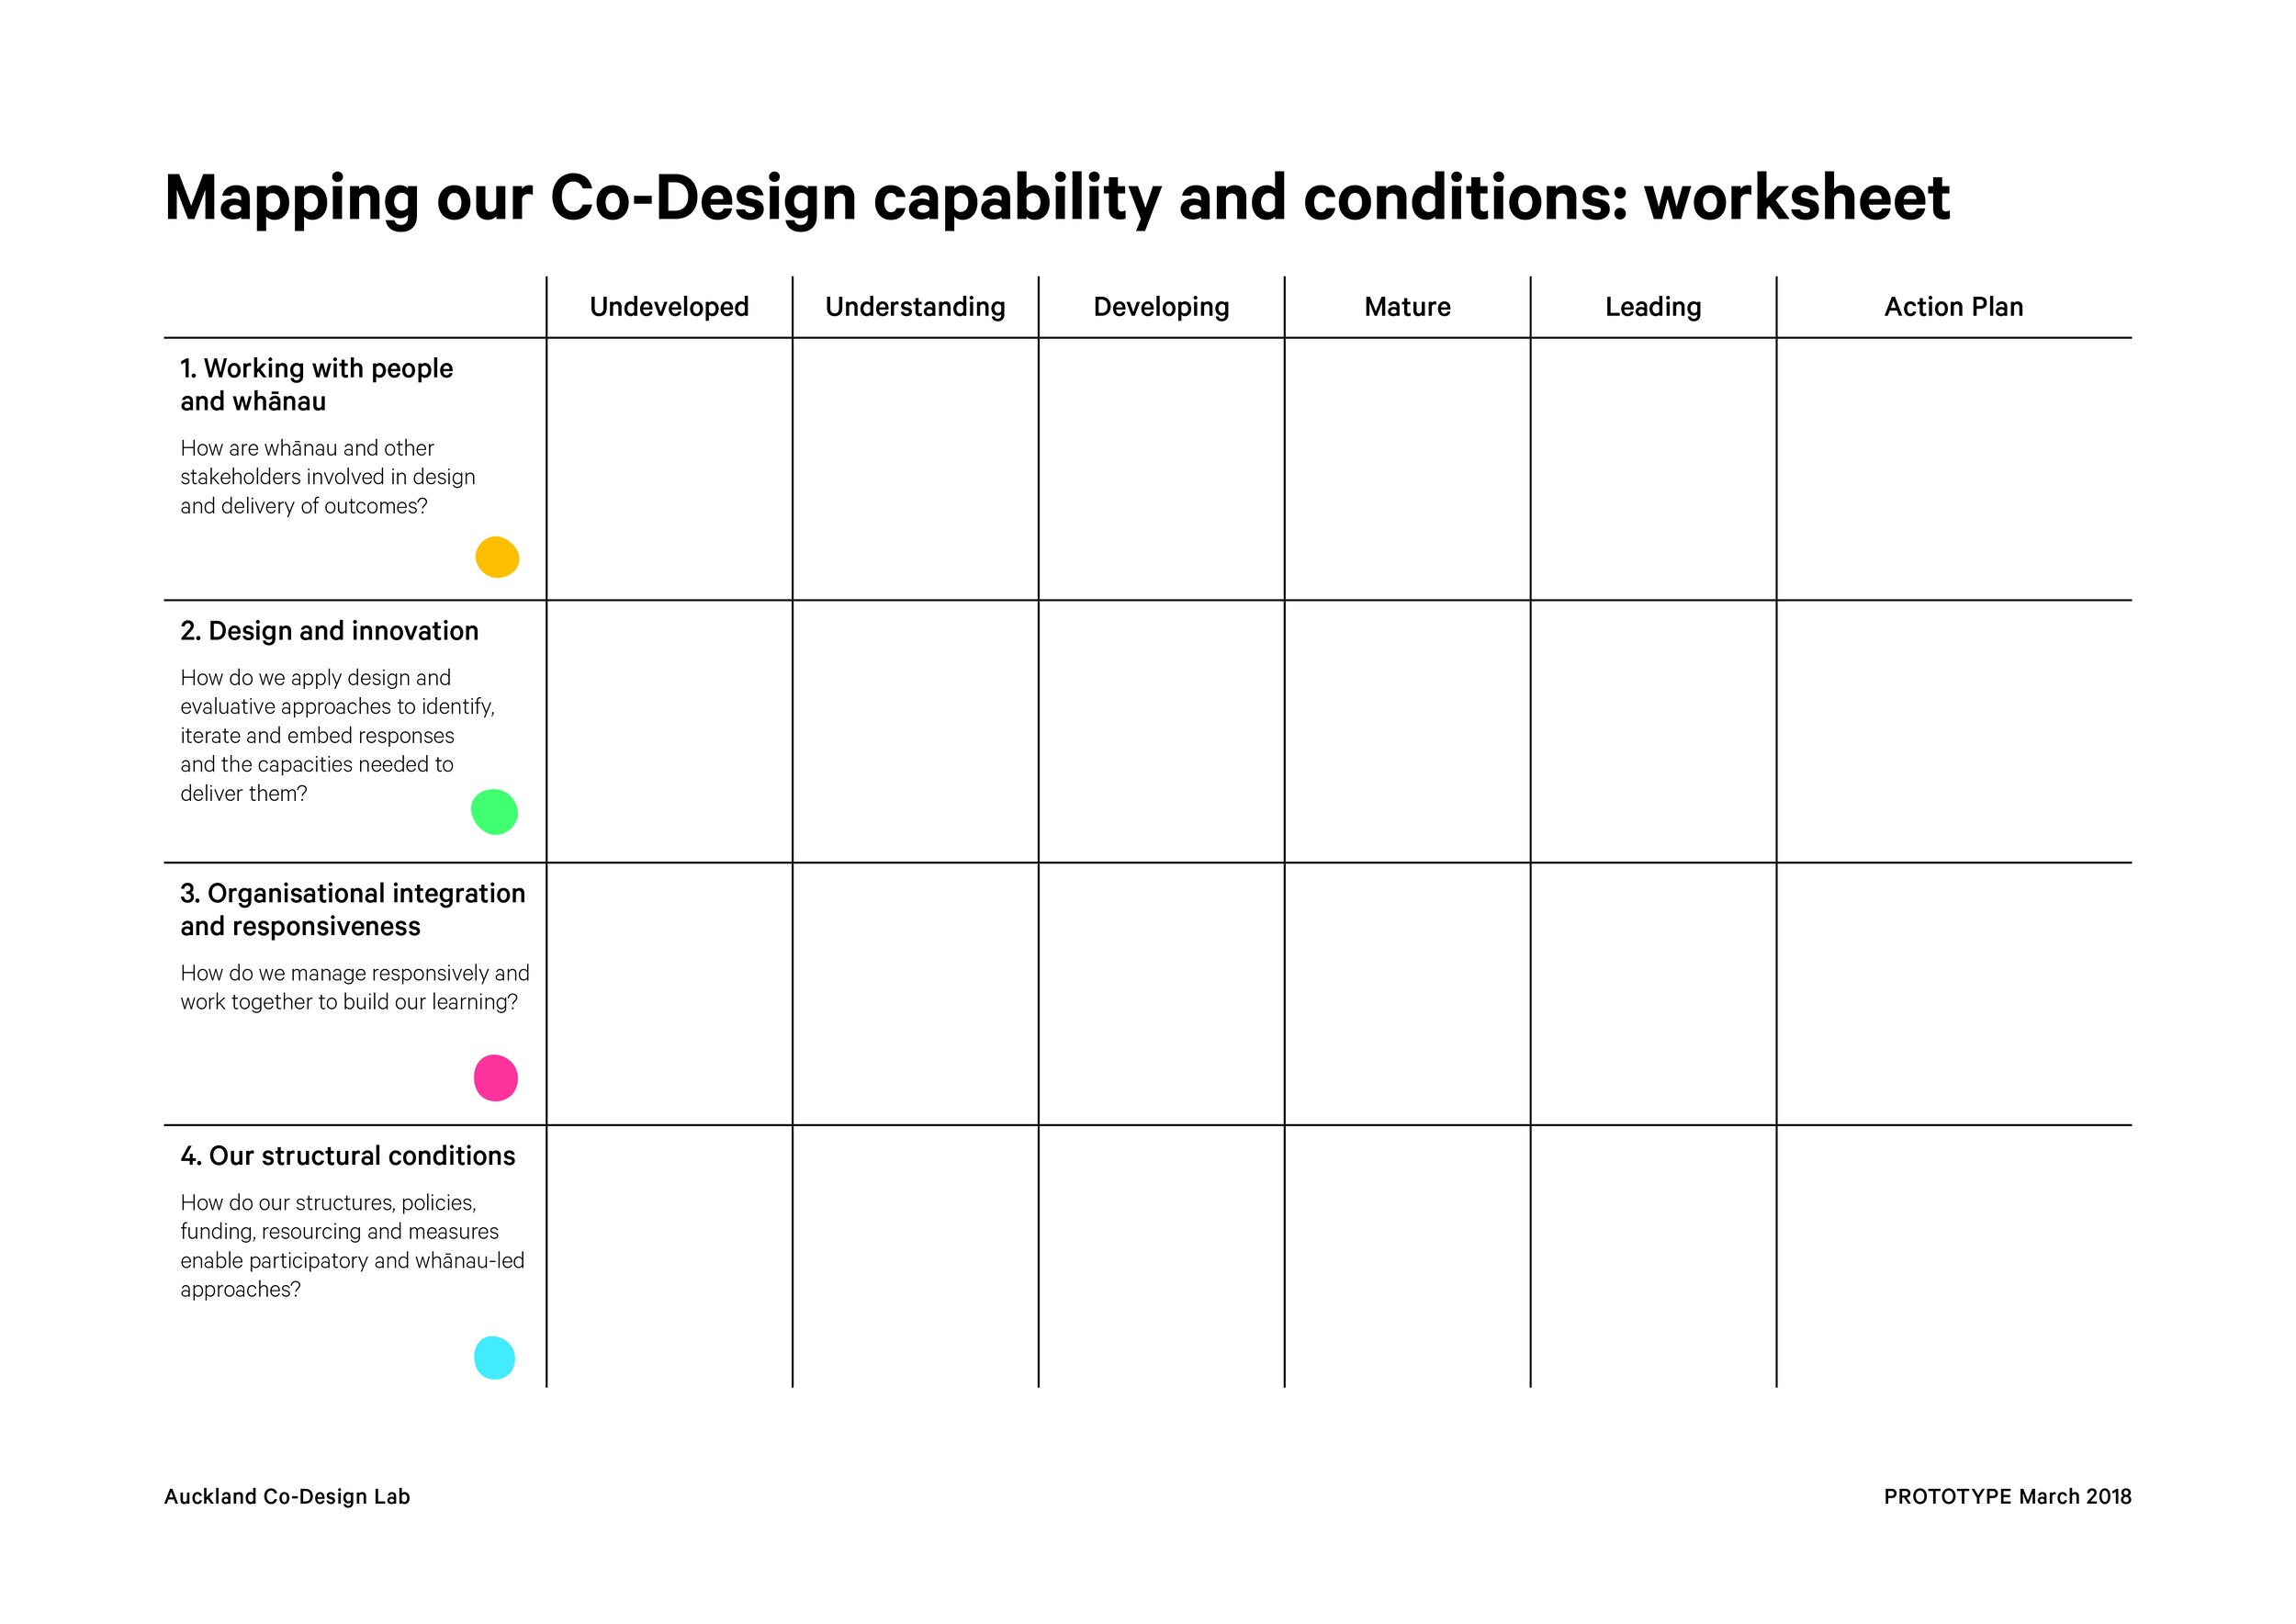 Capability+Workshop+Booklet+A3-7.jpg